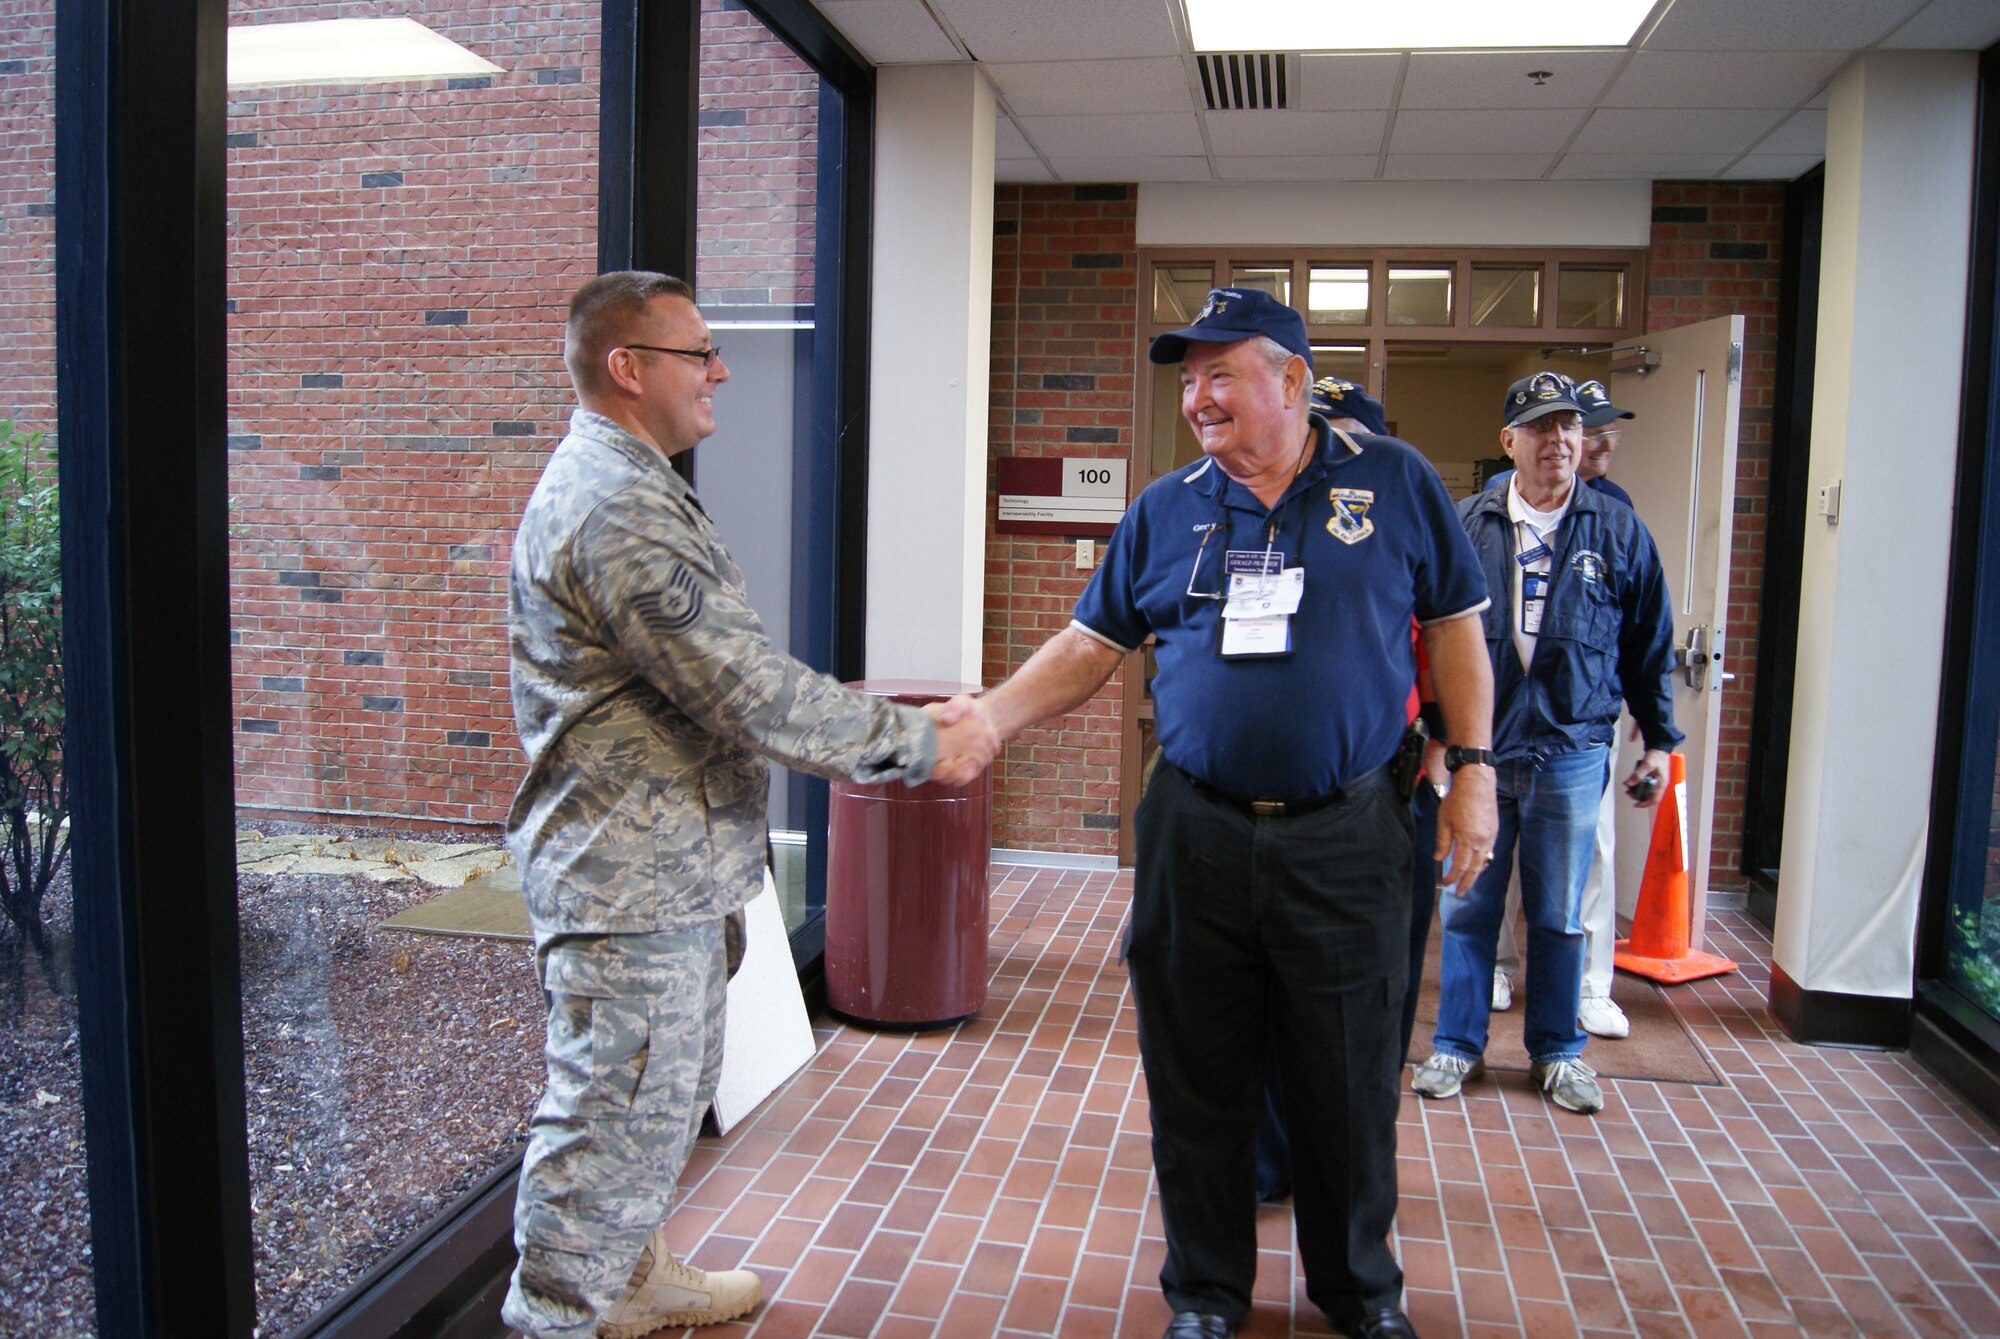 SCOTT AIR FORCE BASE, Ill. – Retired Maj. Gen. Gerald Prather, former commander of the Air Force Communications Command, shakes hands with Tech. Sgt. Christopher Wolf, Technology and Interoperability Facility operations supervisor, during a tour of the facility Sept. 22. (U.S. Air Force photo/ Melisse Noud)